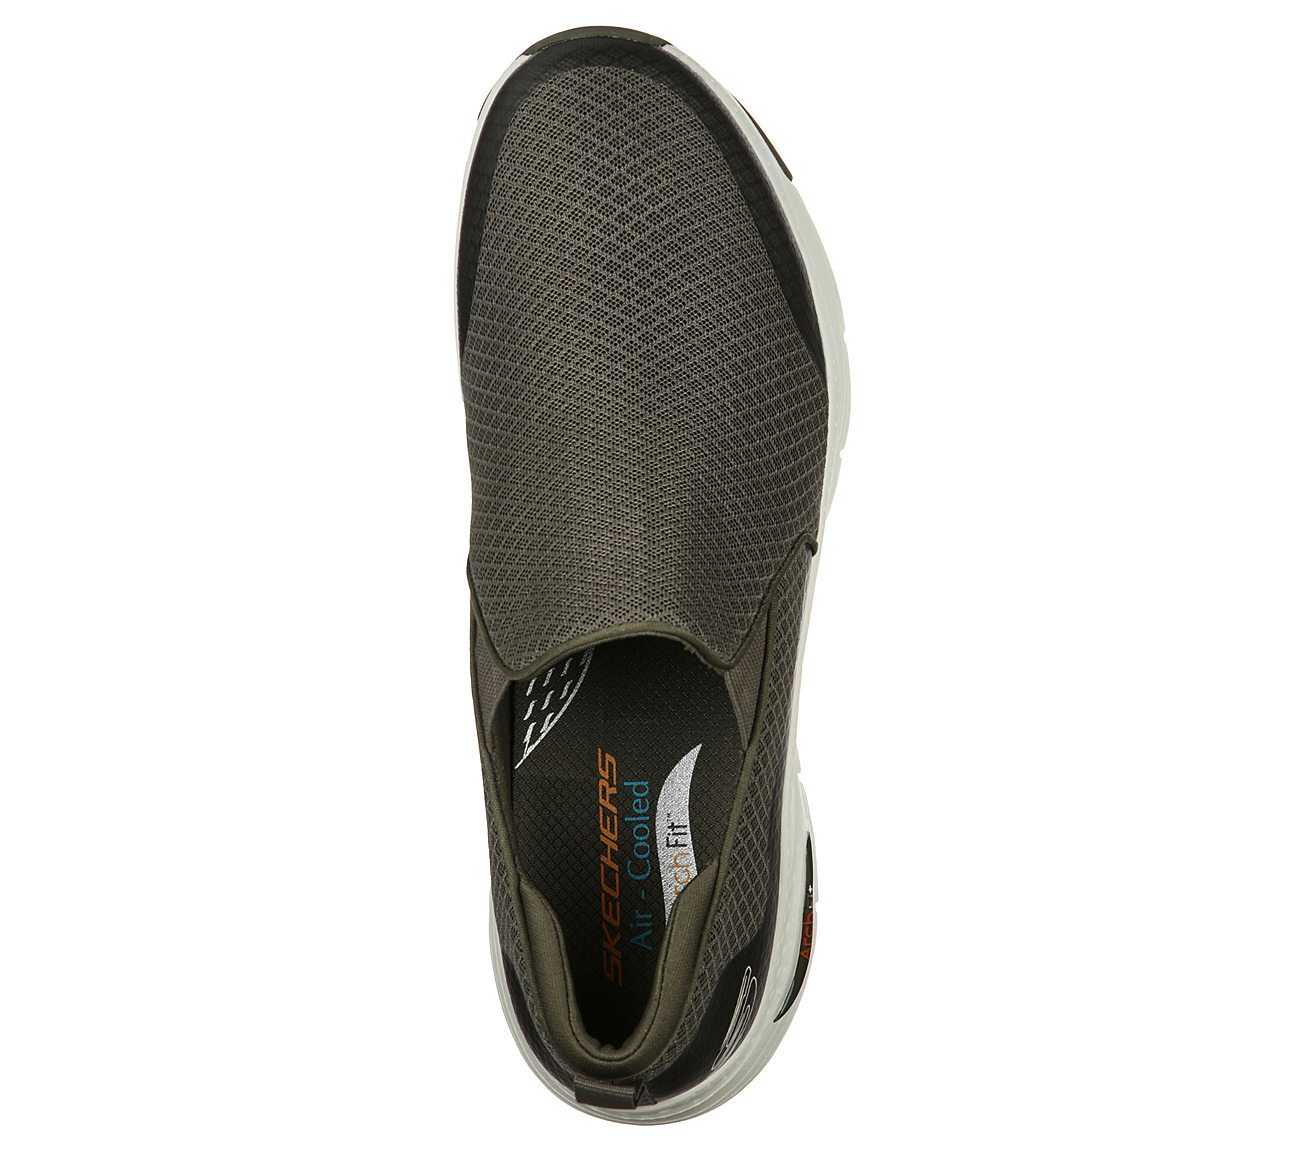 ARCH FIT-BANLIN, OOLIVE Footwear Top View